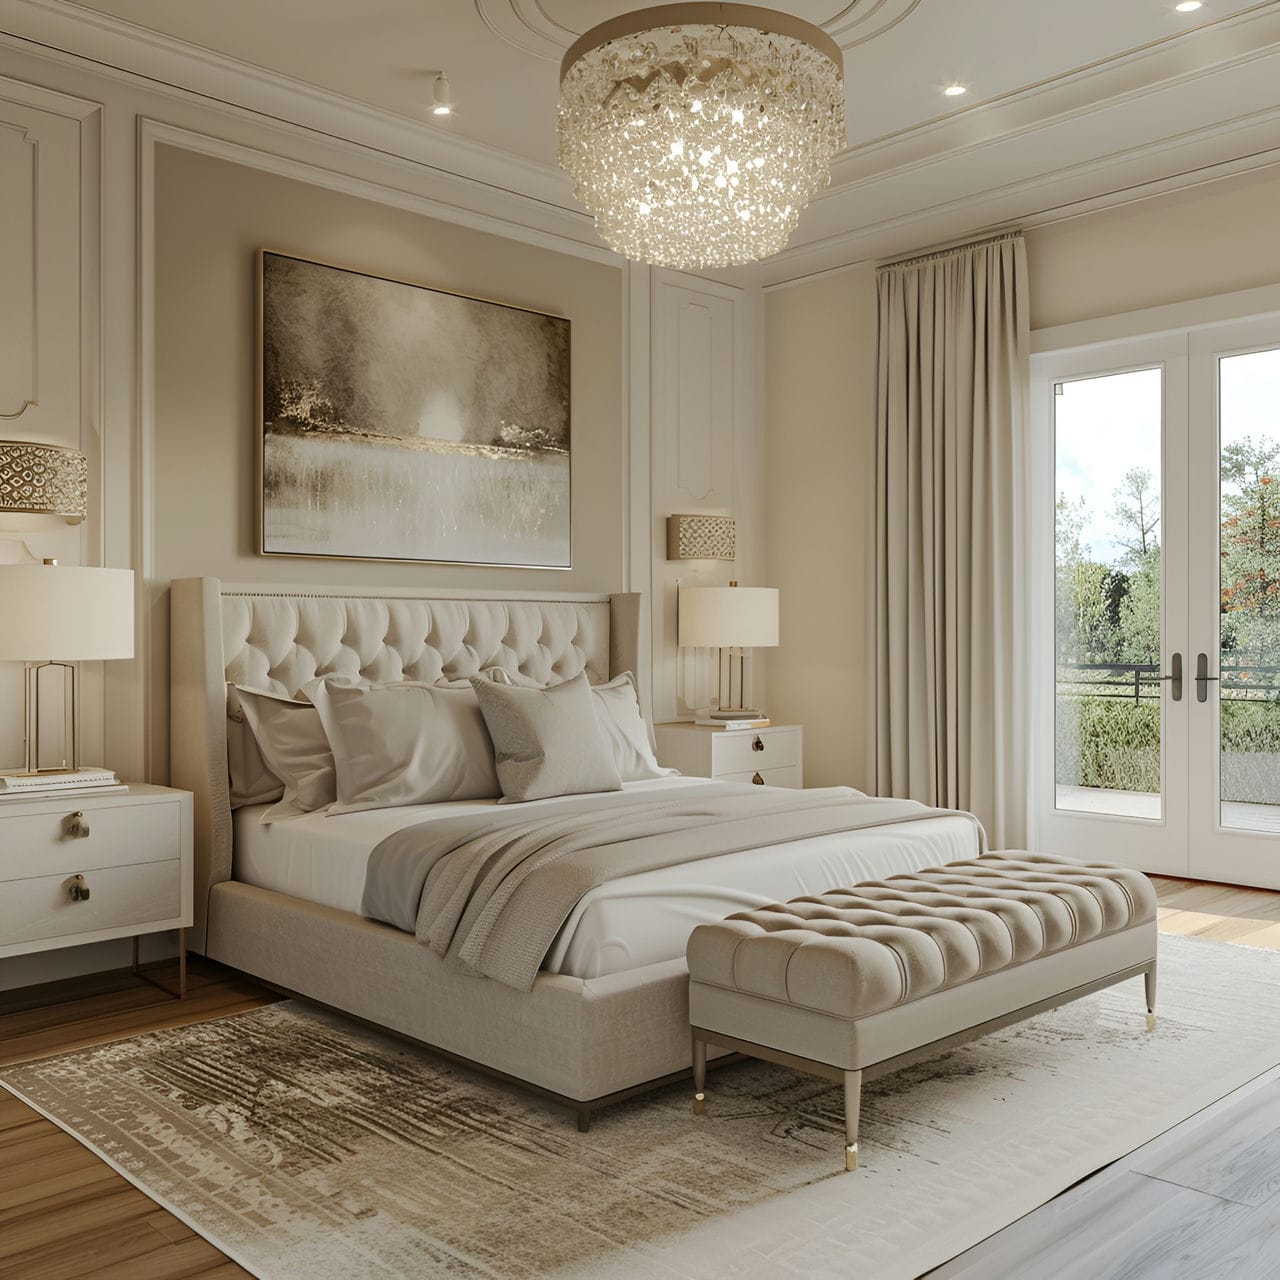 Bedroom: size, functionality, uses, furniture, and renovation